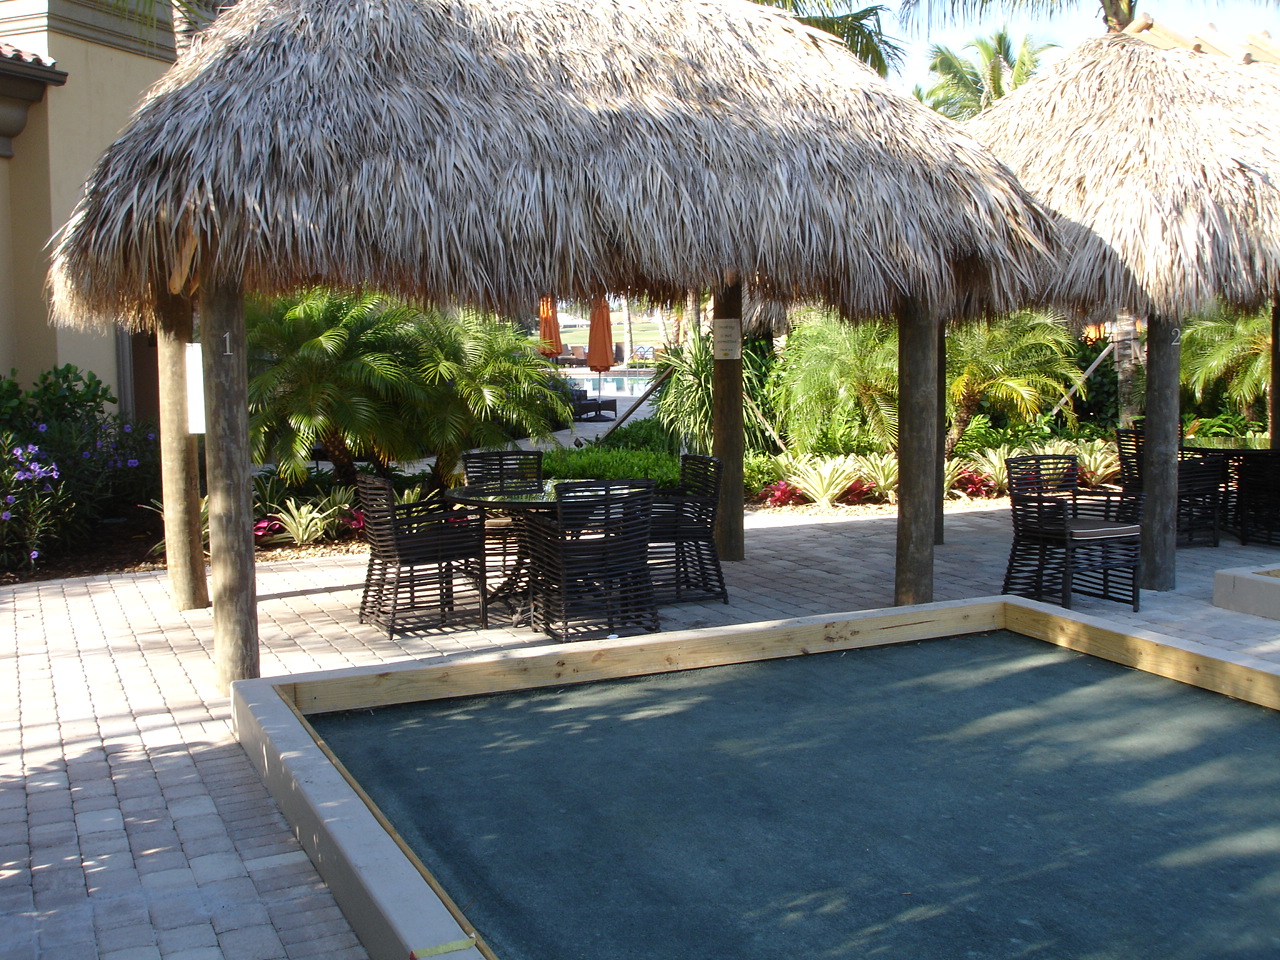 LELY RESORT Bocce Ball Courts